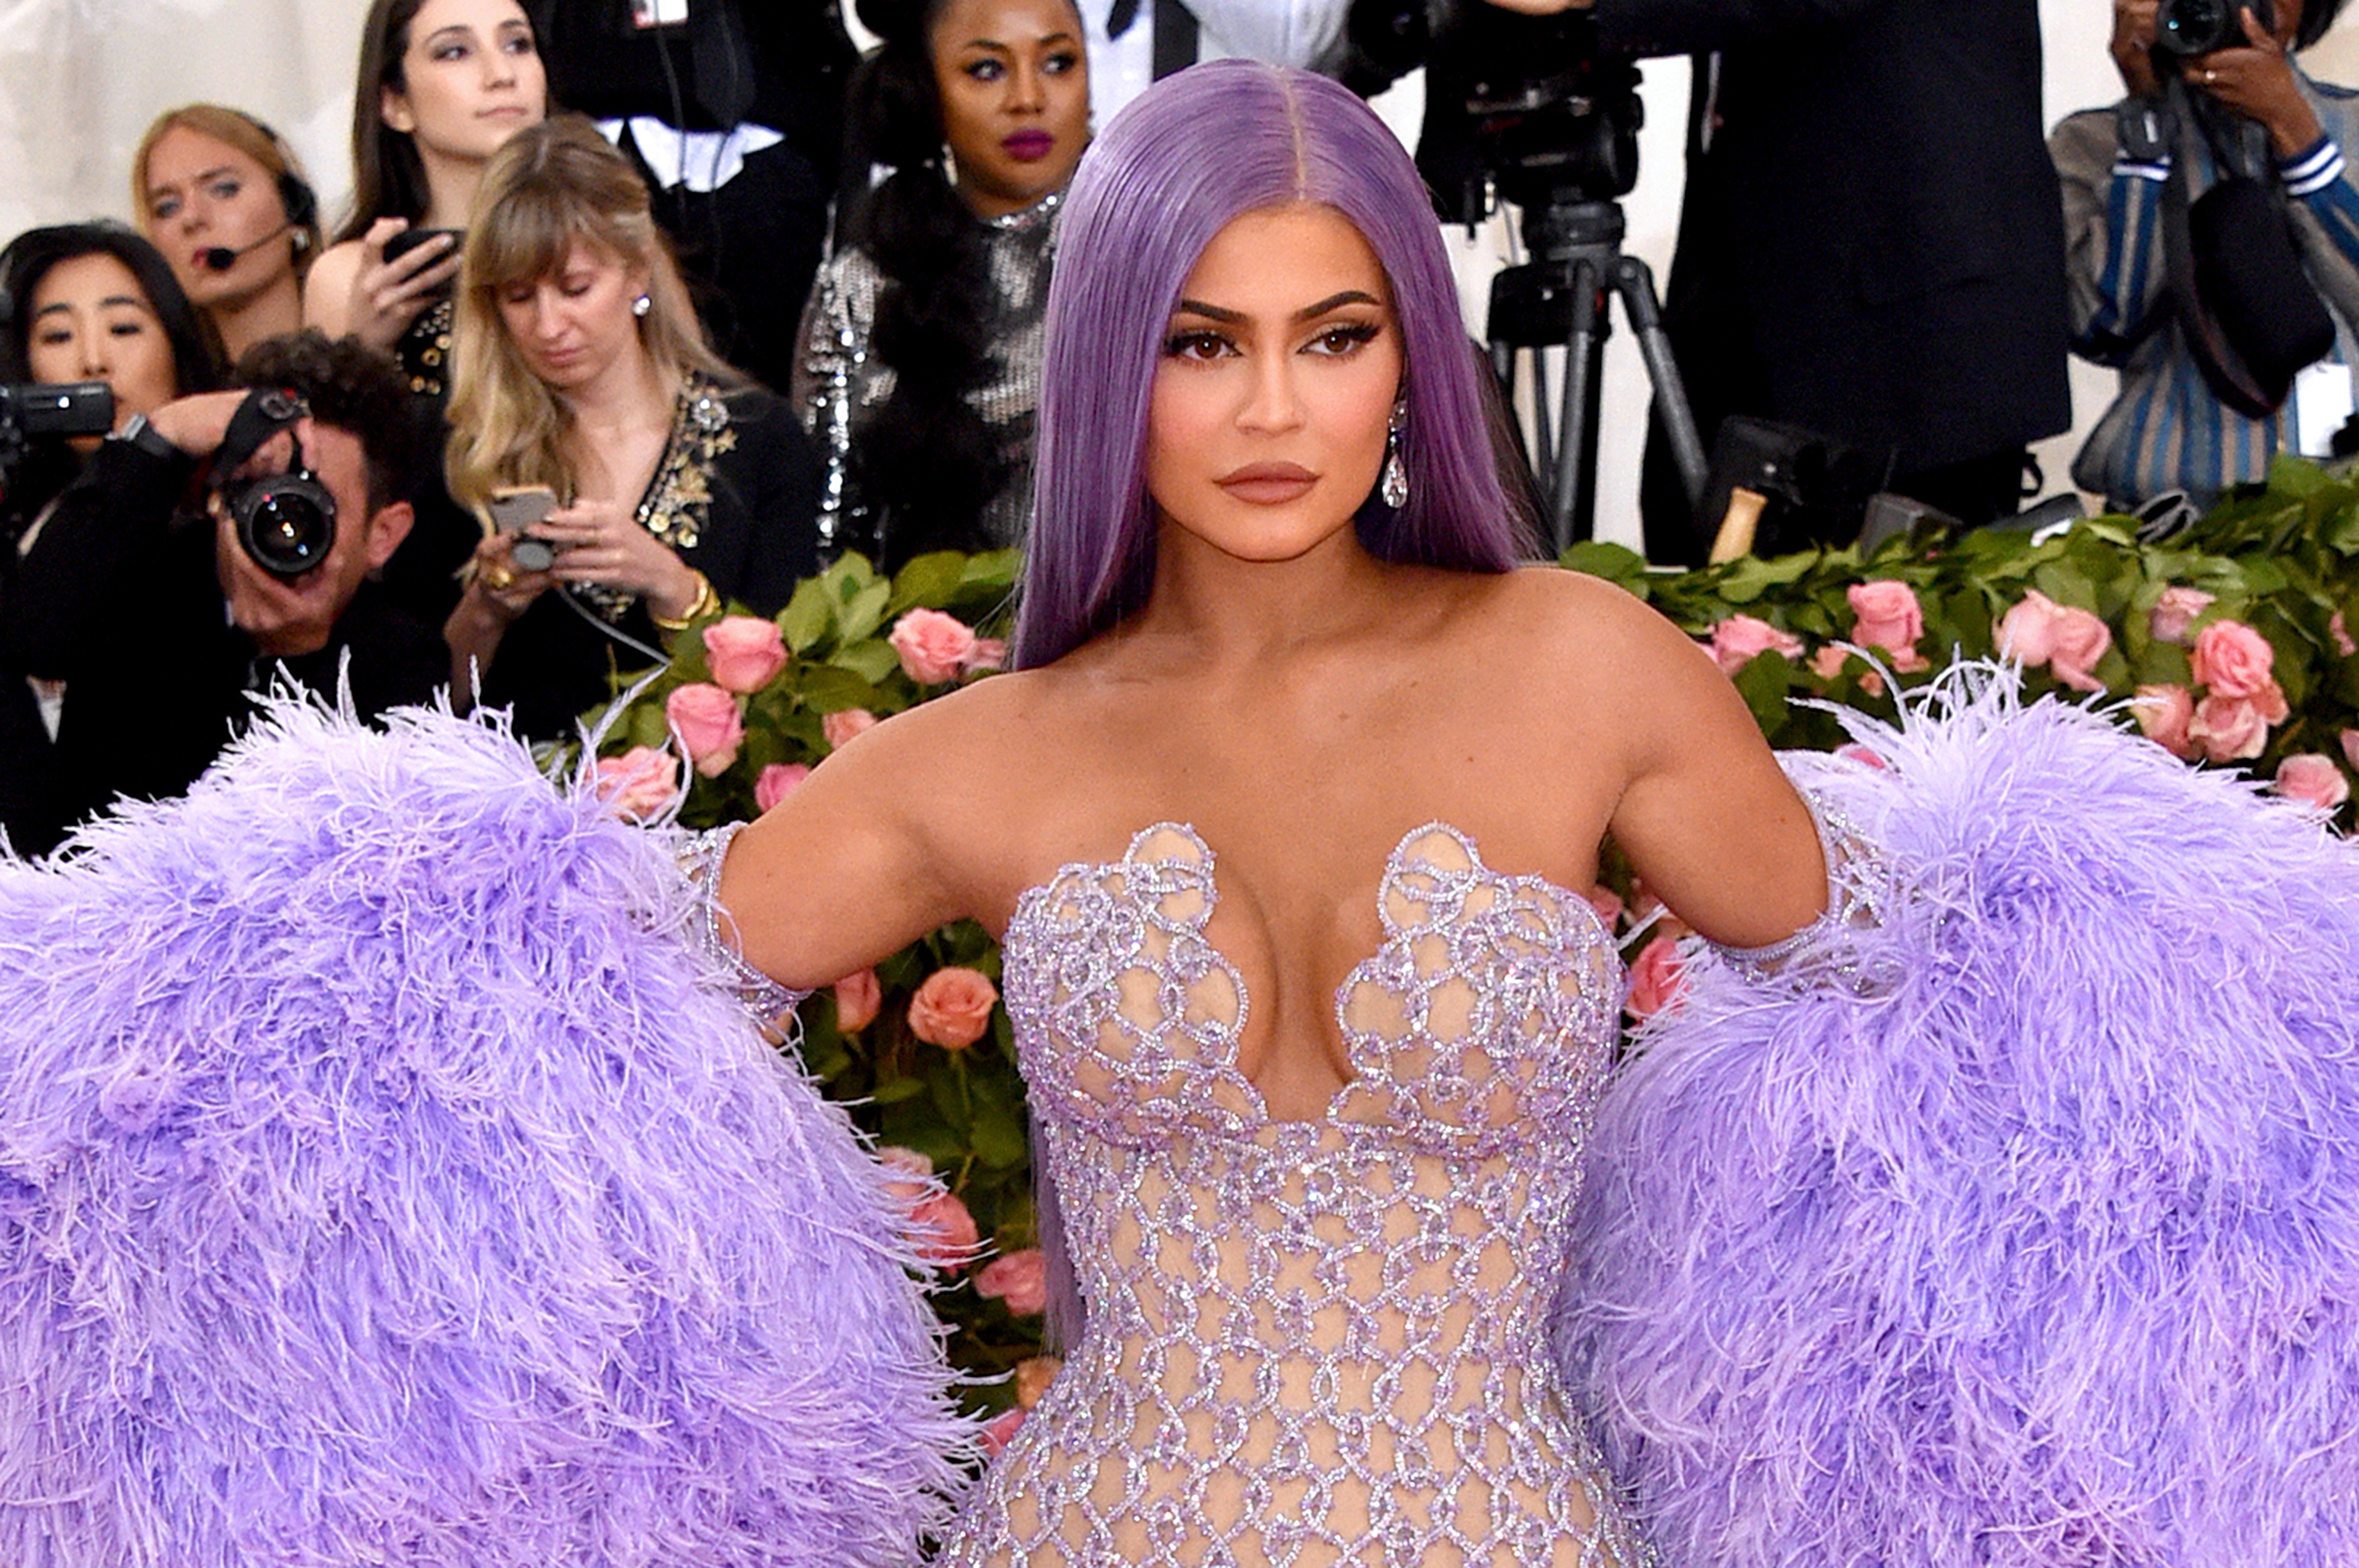 Kylie Jenner at the 2019 Met Gala "Celebrating Camp: Notes on Fashion" at Metropolitan Museum of Art on May 06, 2019. | Source: Getty Images